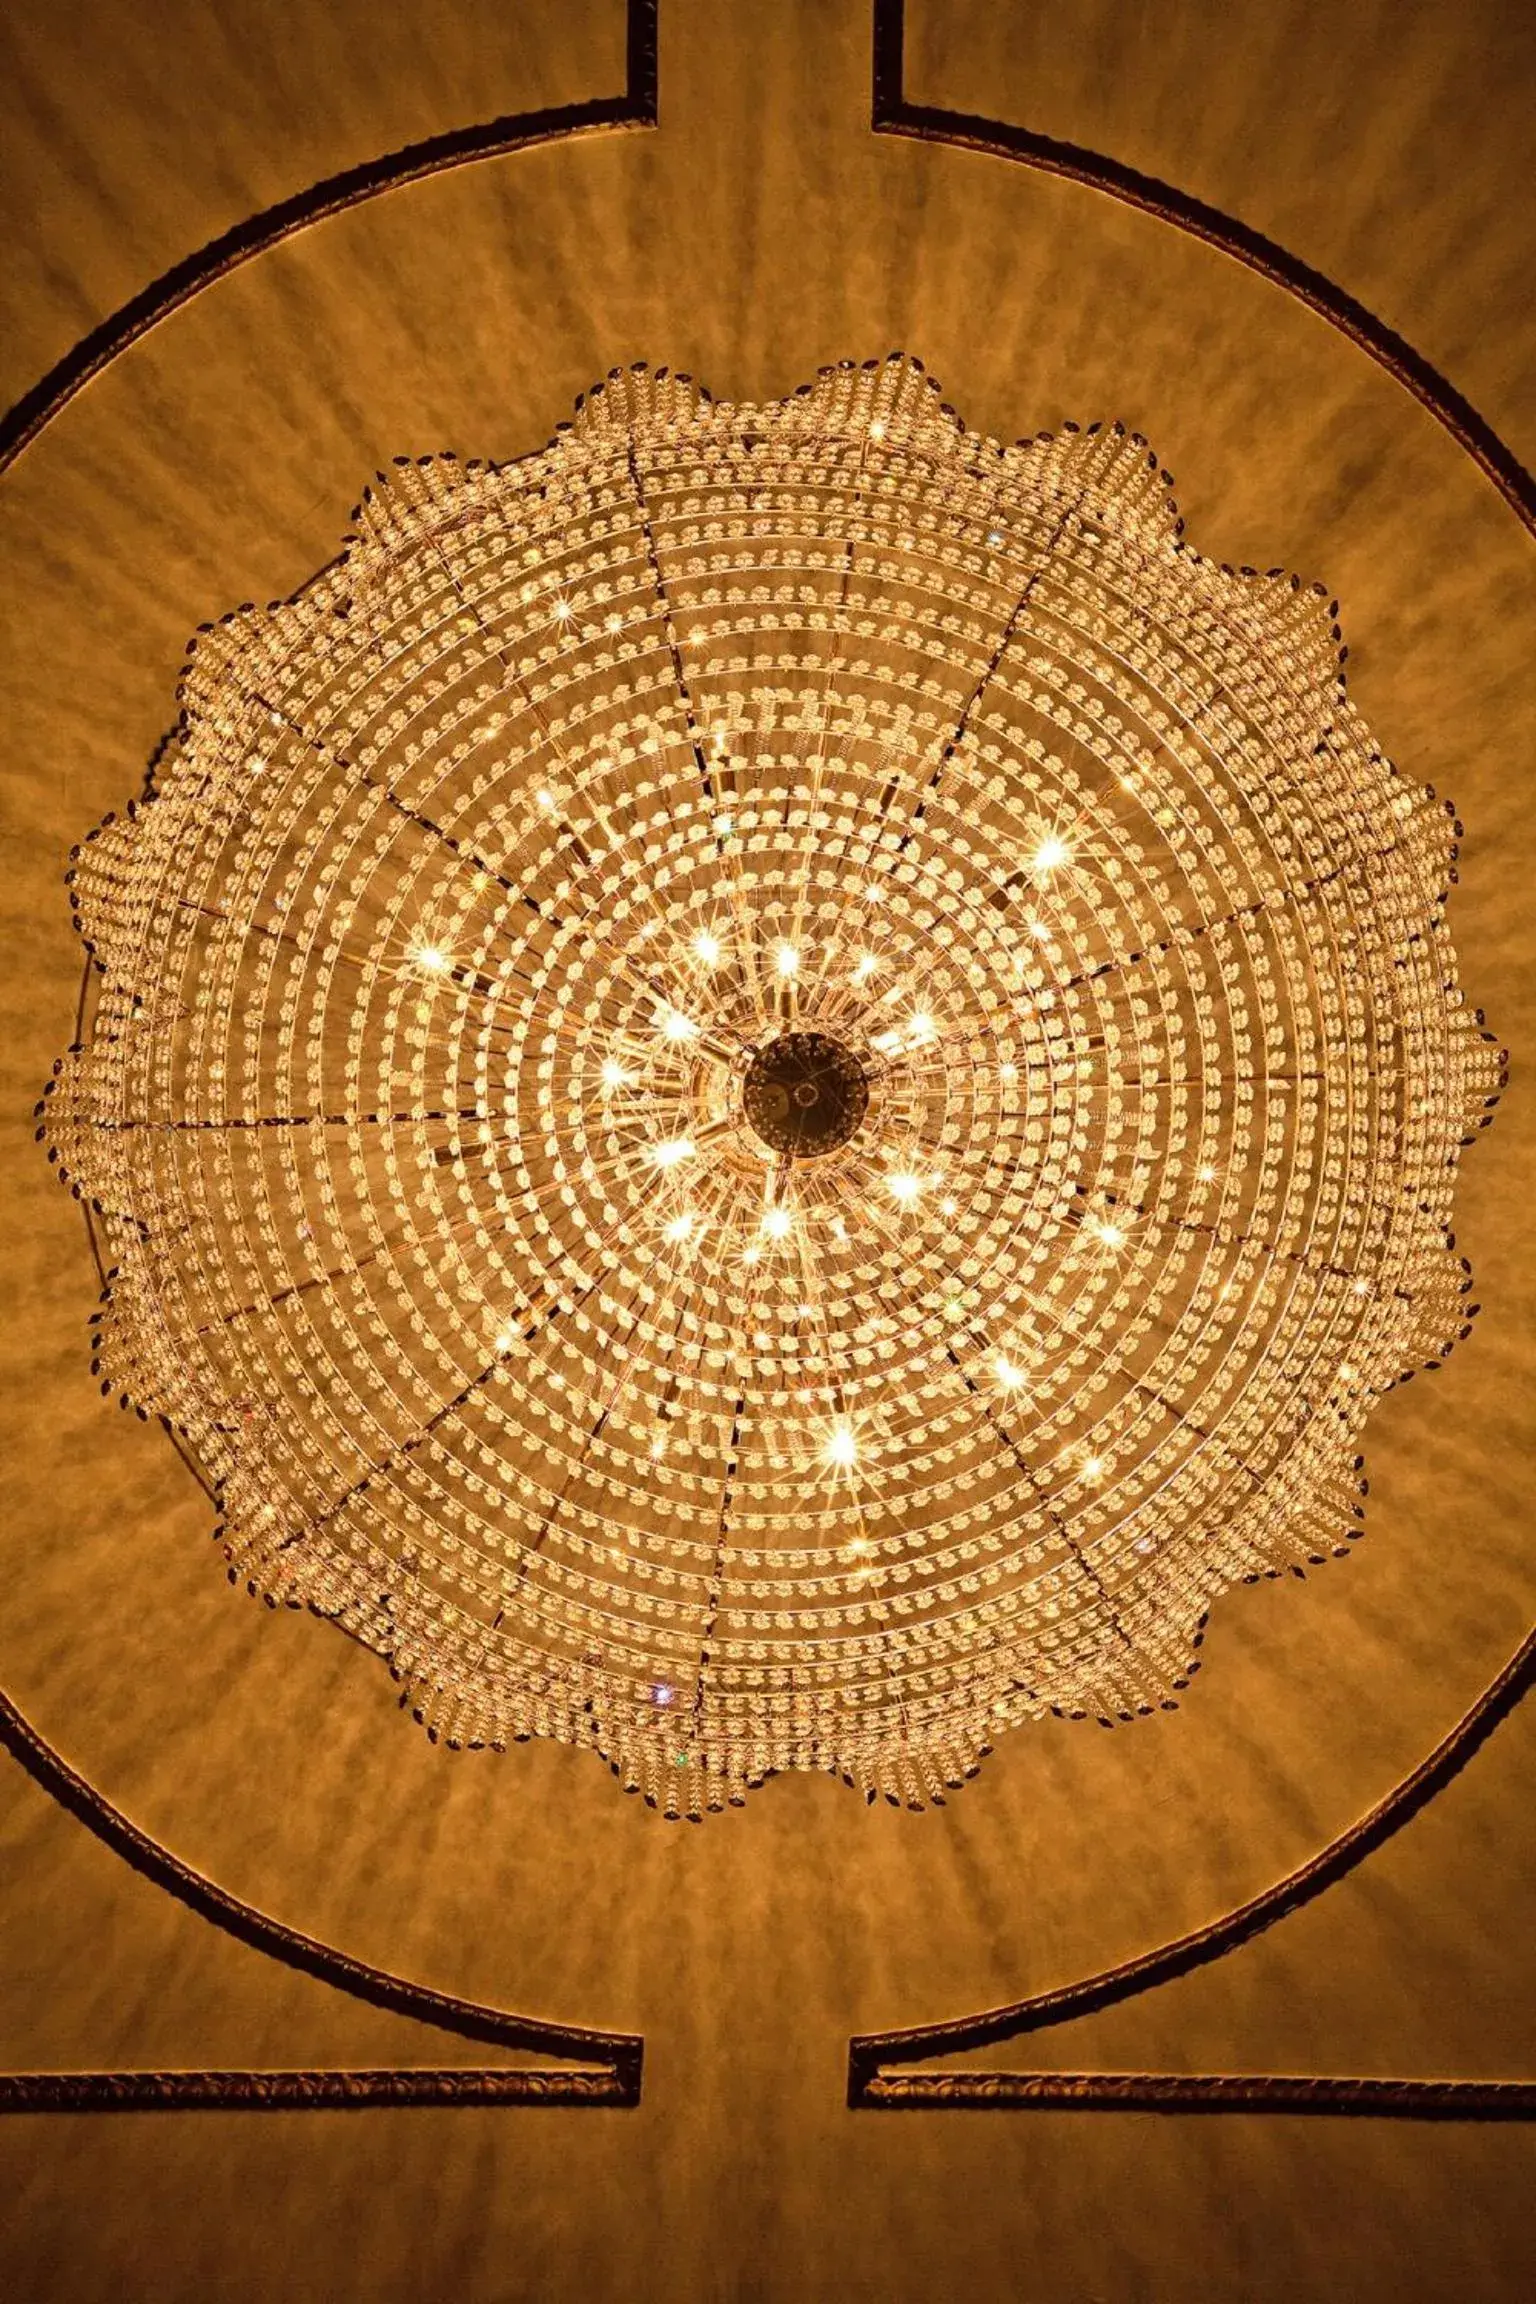 Decorative detail in Grand Hotel Bellevue - adults only